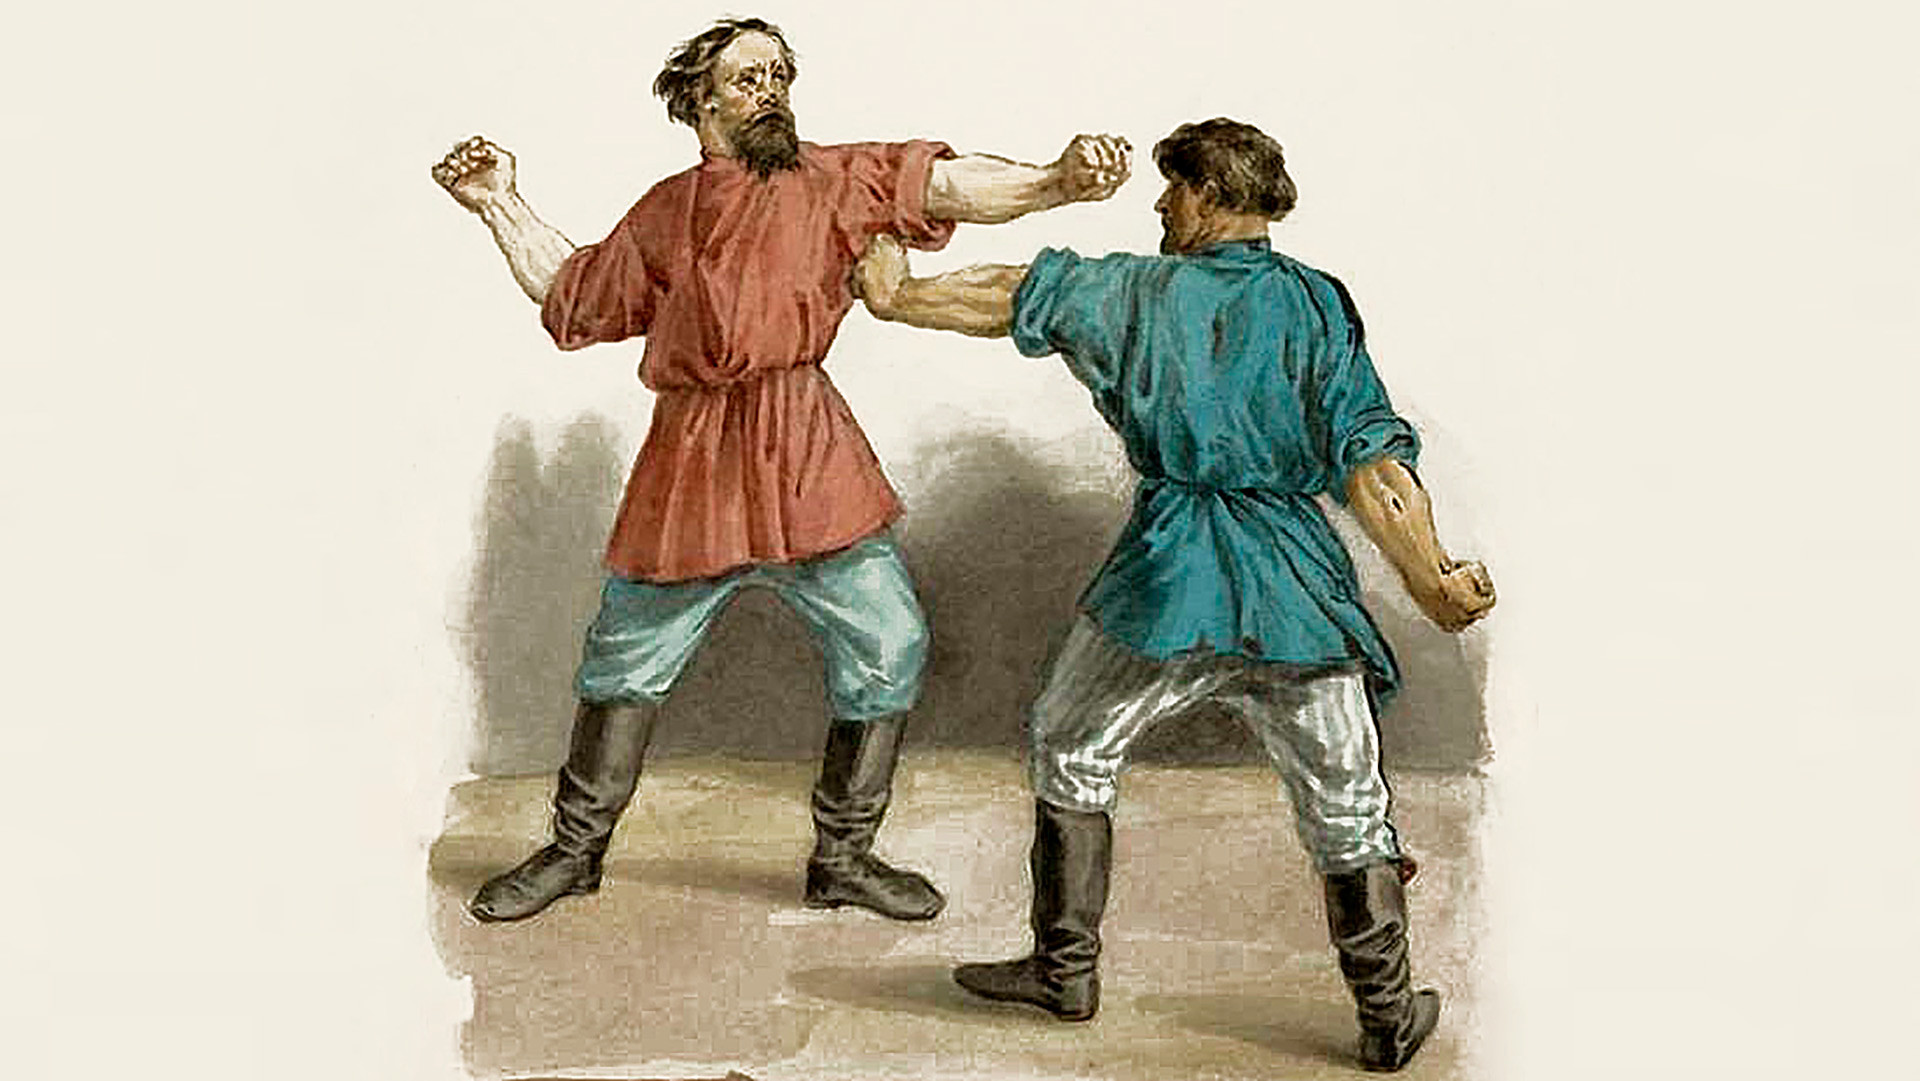 An episode from a fist fight (19-century illustration)